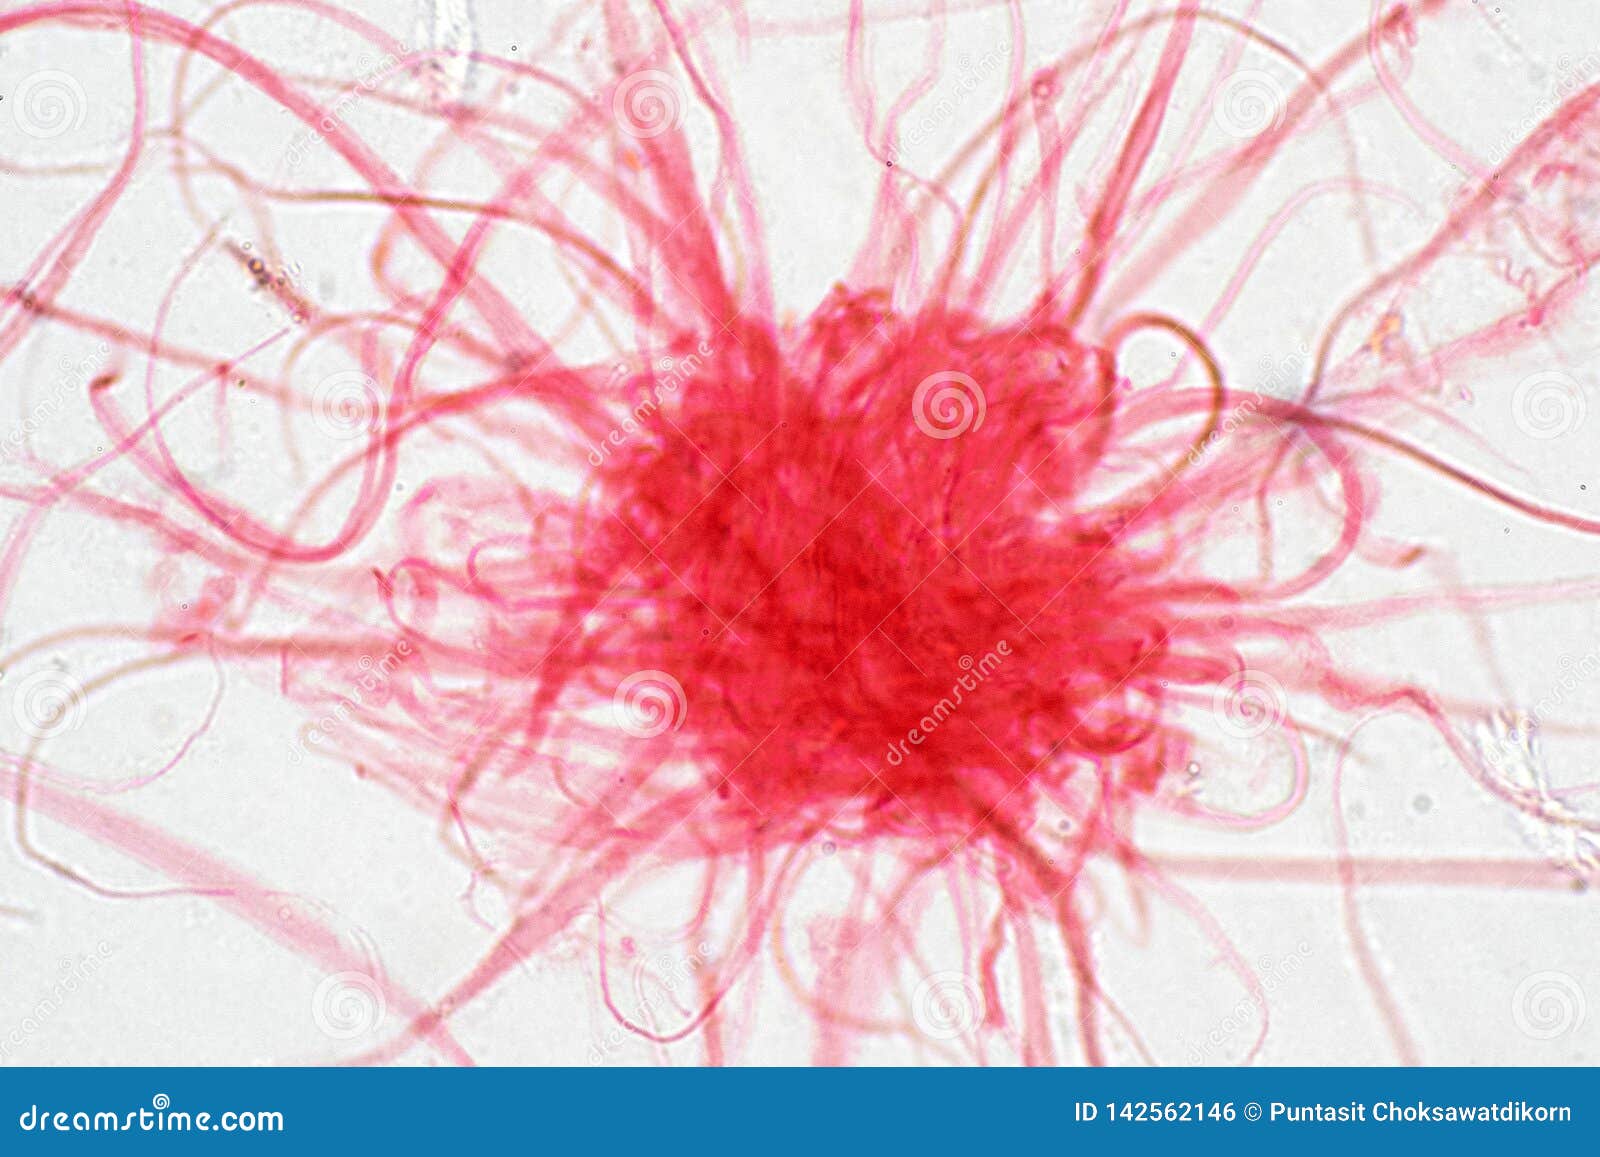 Cancer Cell In Human Under The Microscope View Stock Photo - Image of